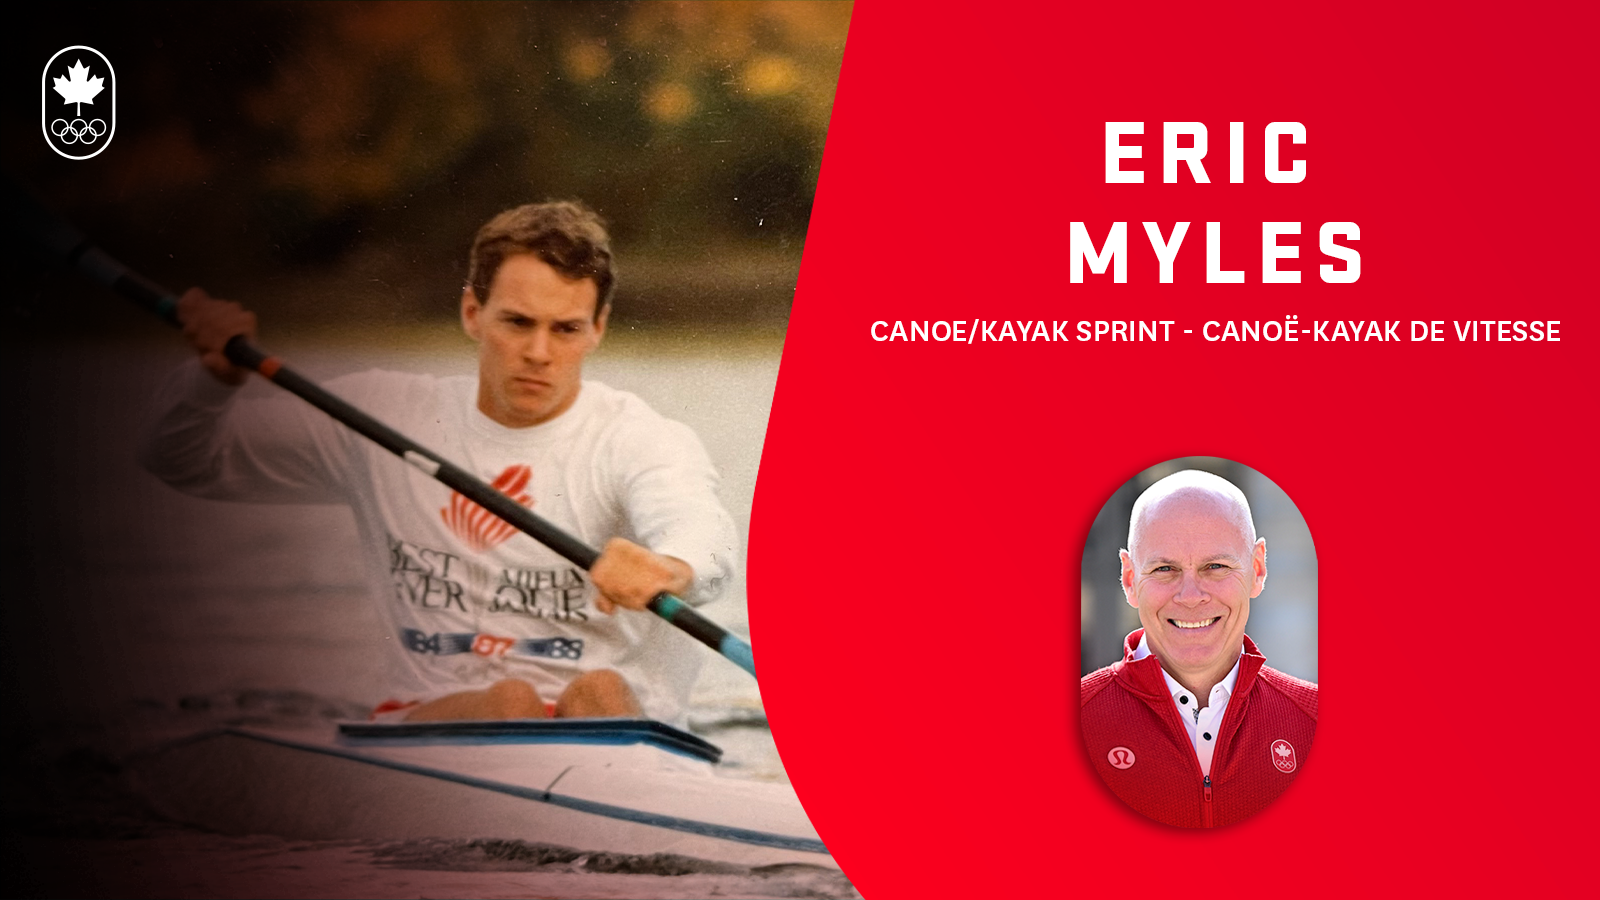 Team Behind the Team: Meet Eric Myles, 1987 Pan American Games
medallist in canoe/kayak and Chief Sport Officer at the COC 